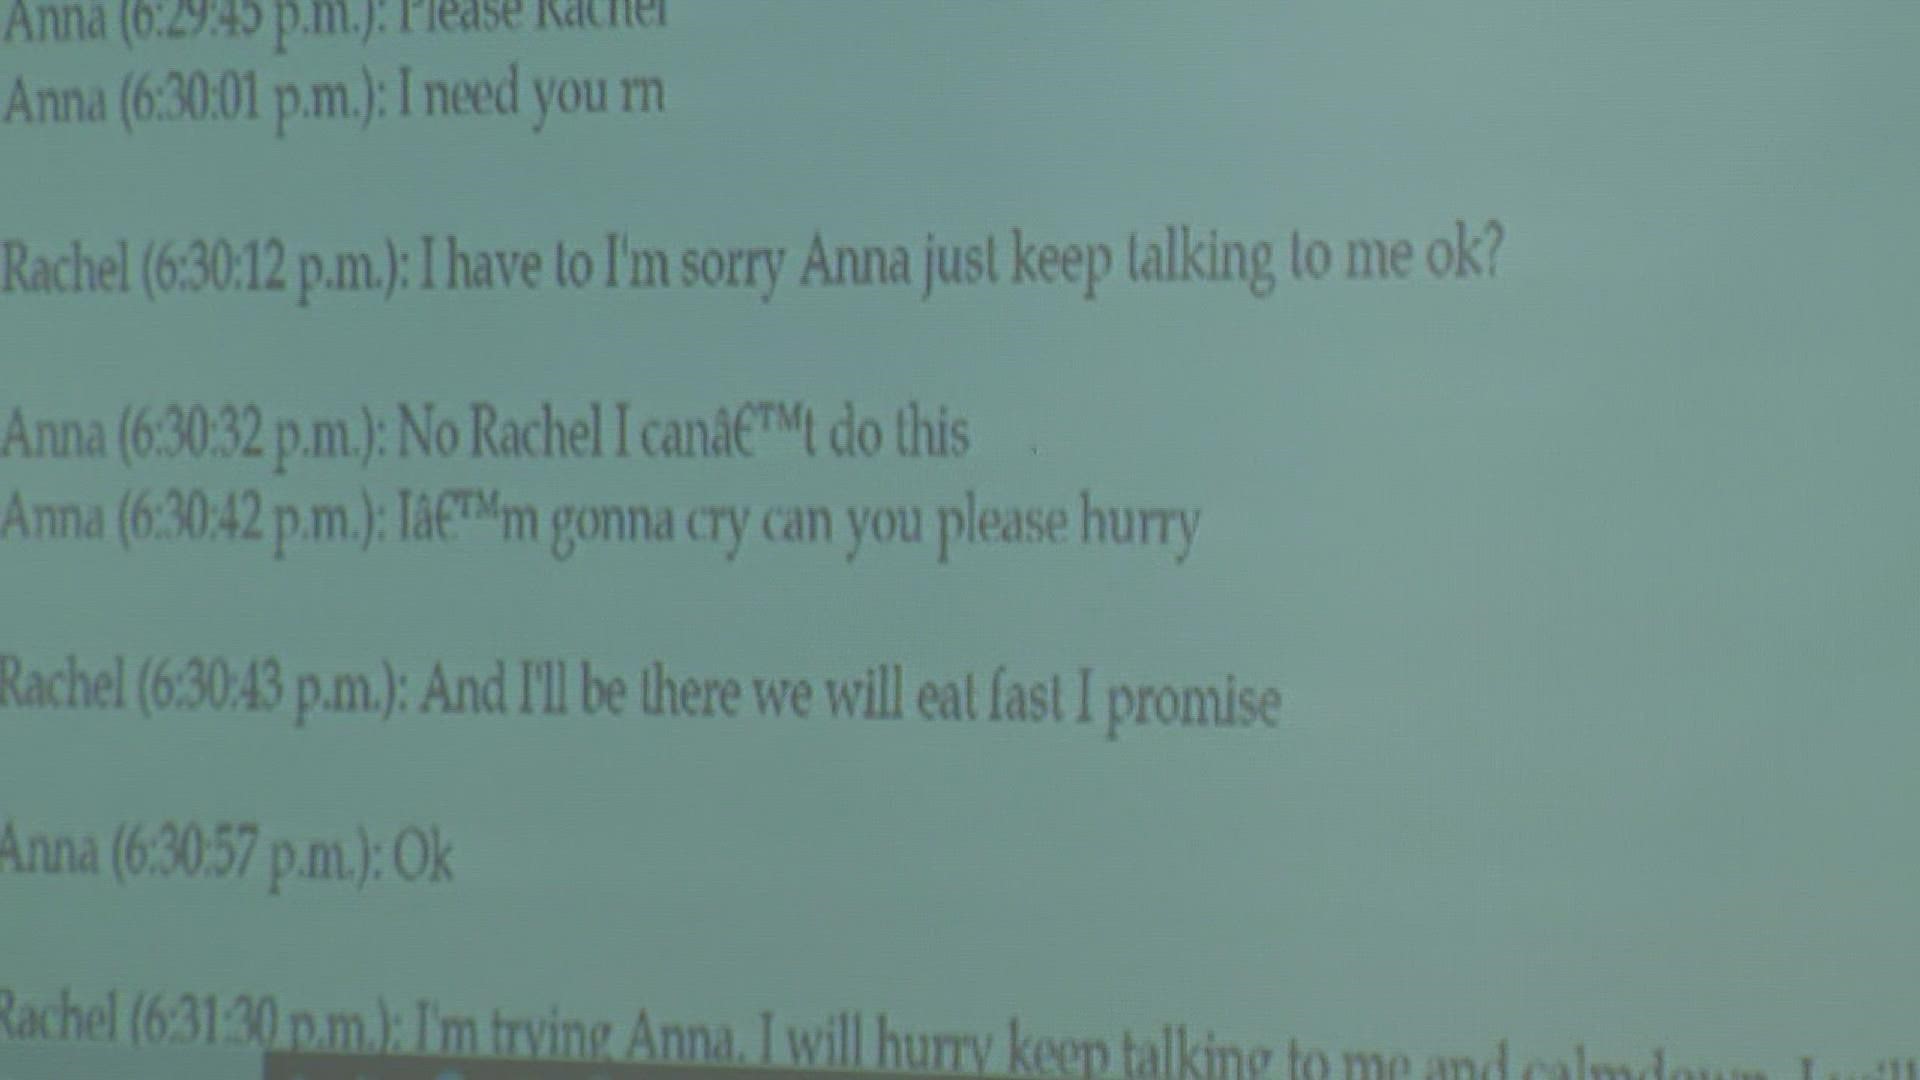 Text messages between Anna Schroeder and Rachel Helm are read in court.